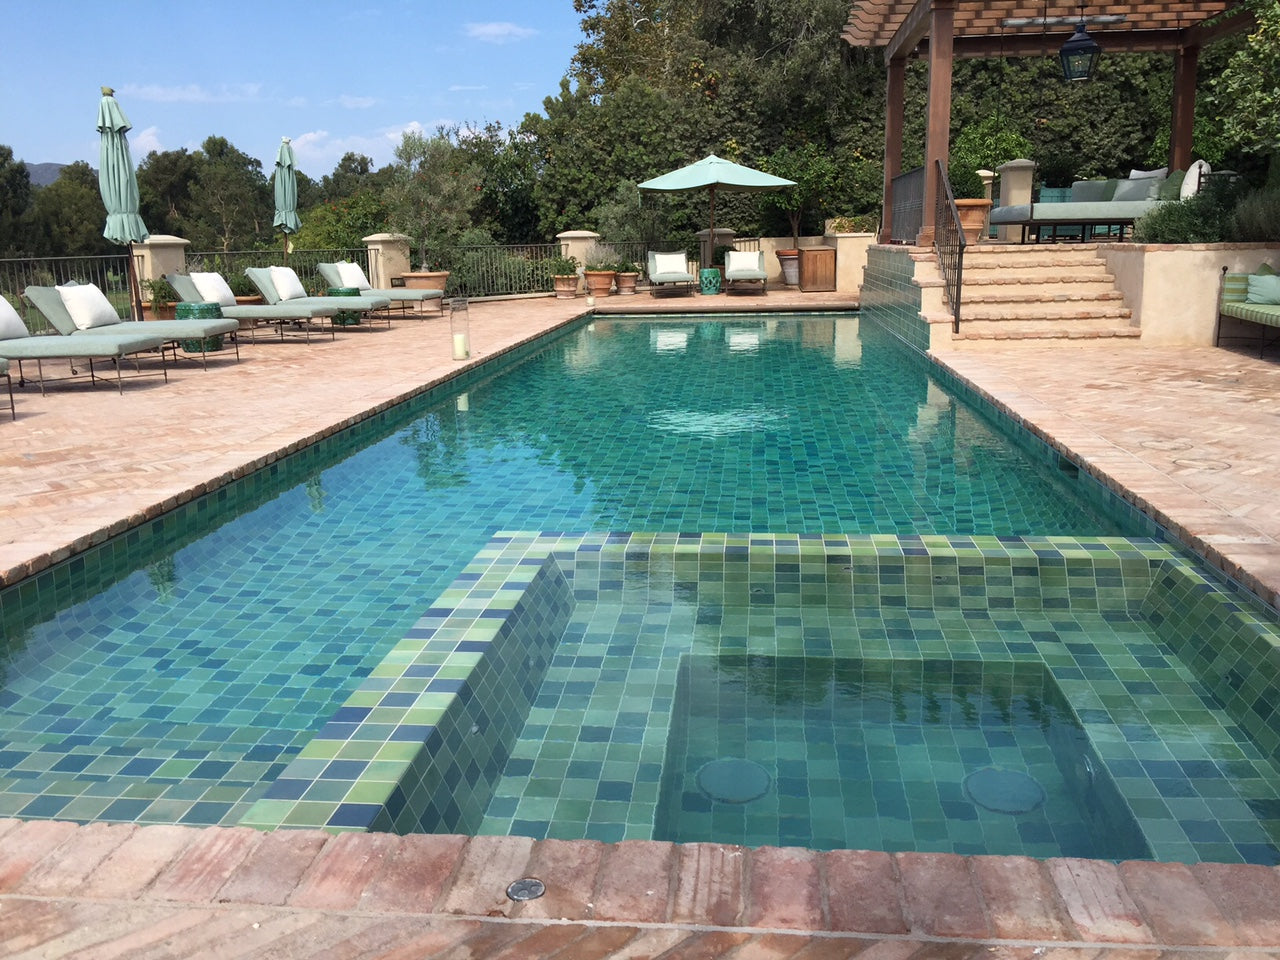 Seven colors of blue and green field tiles - pool liner and waterline tiles